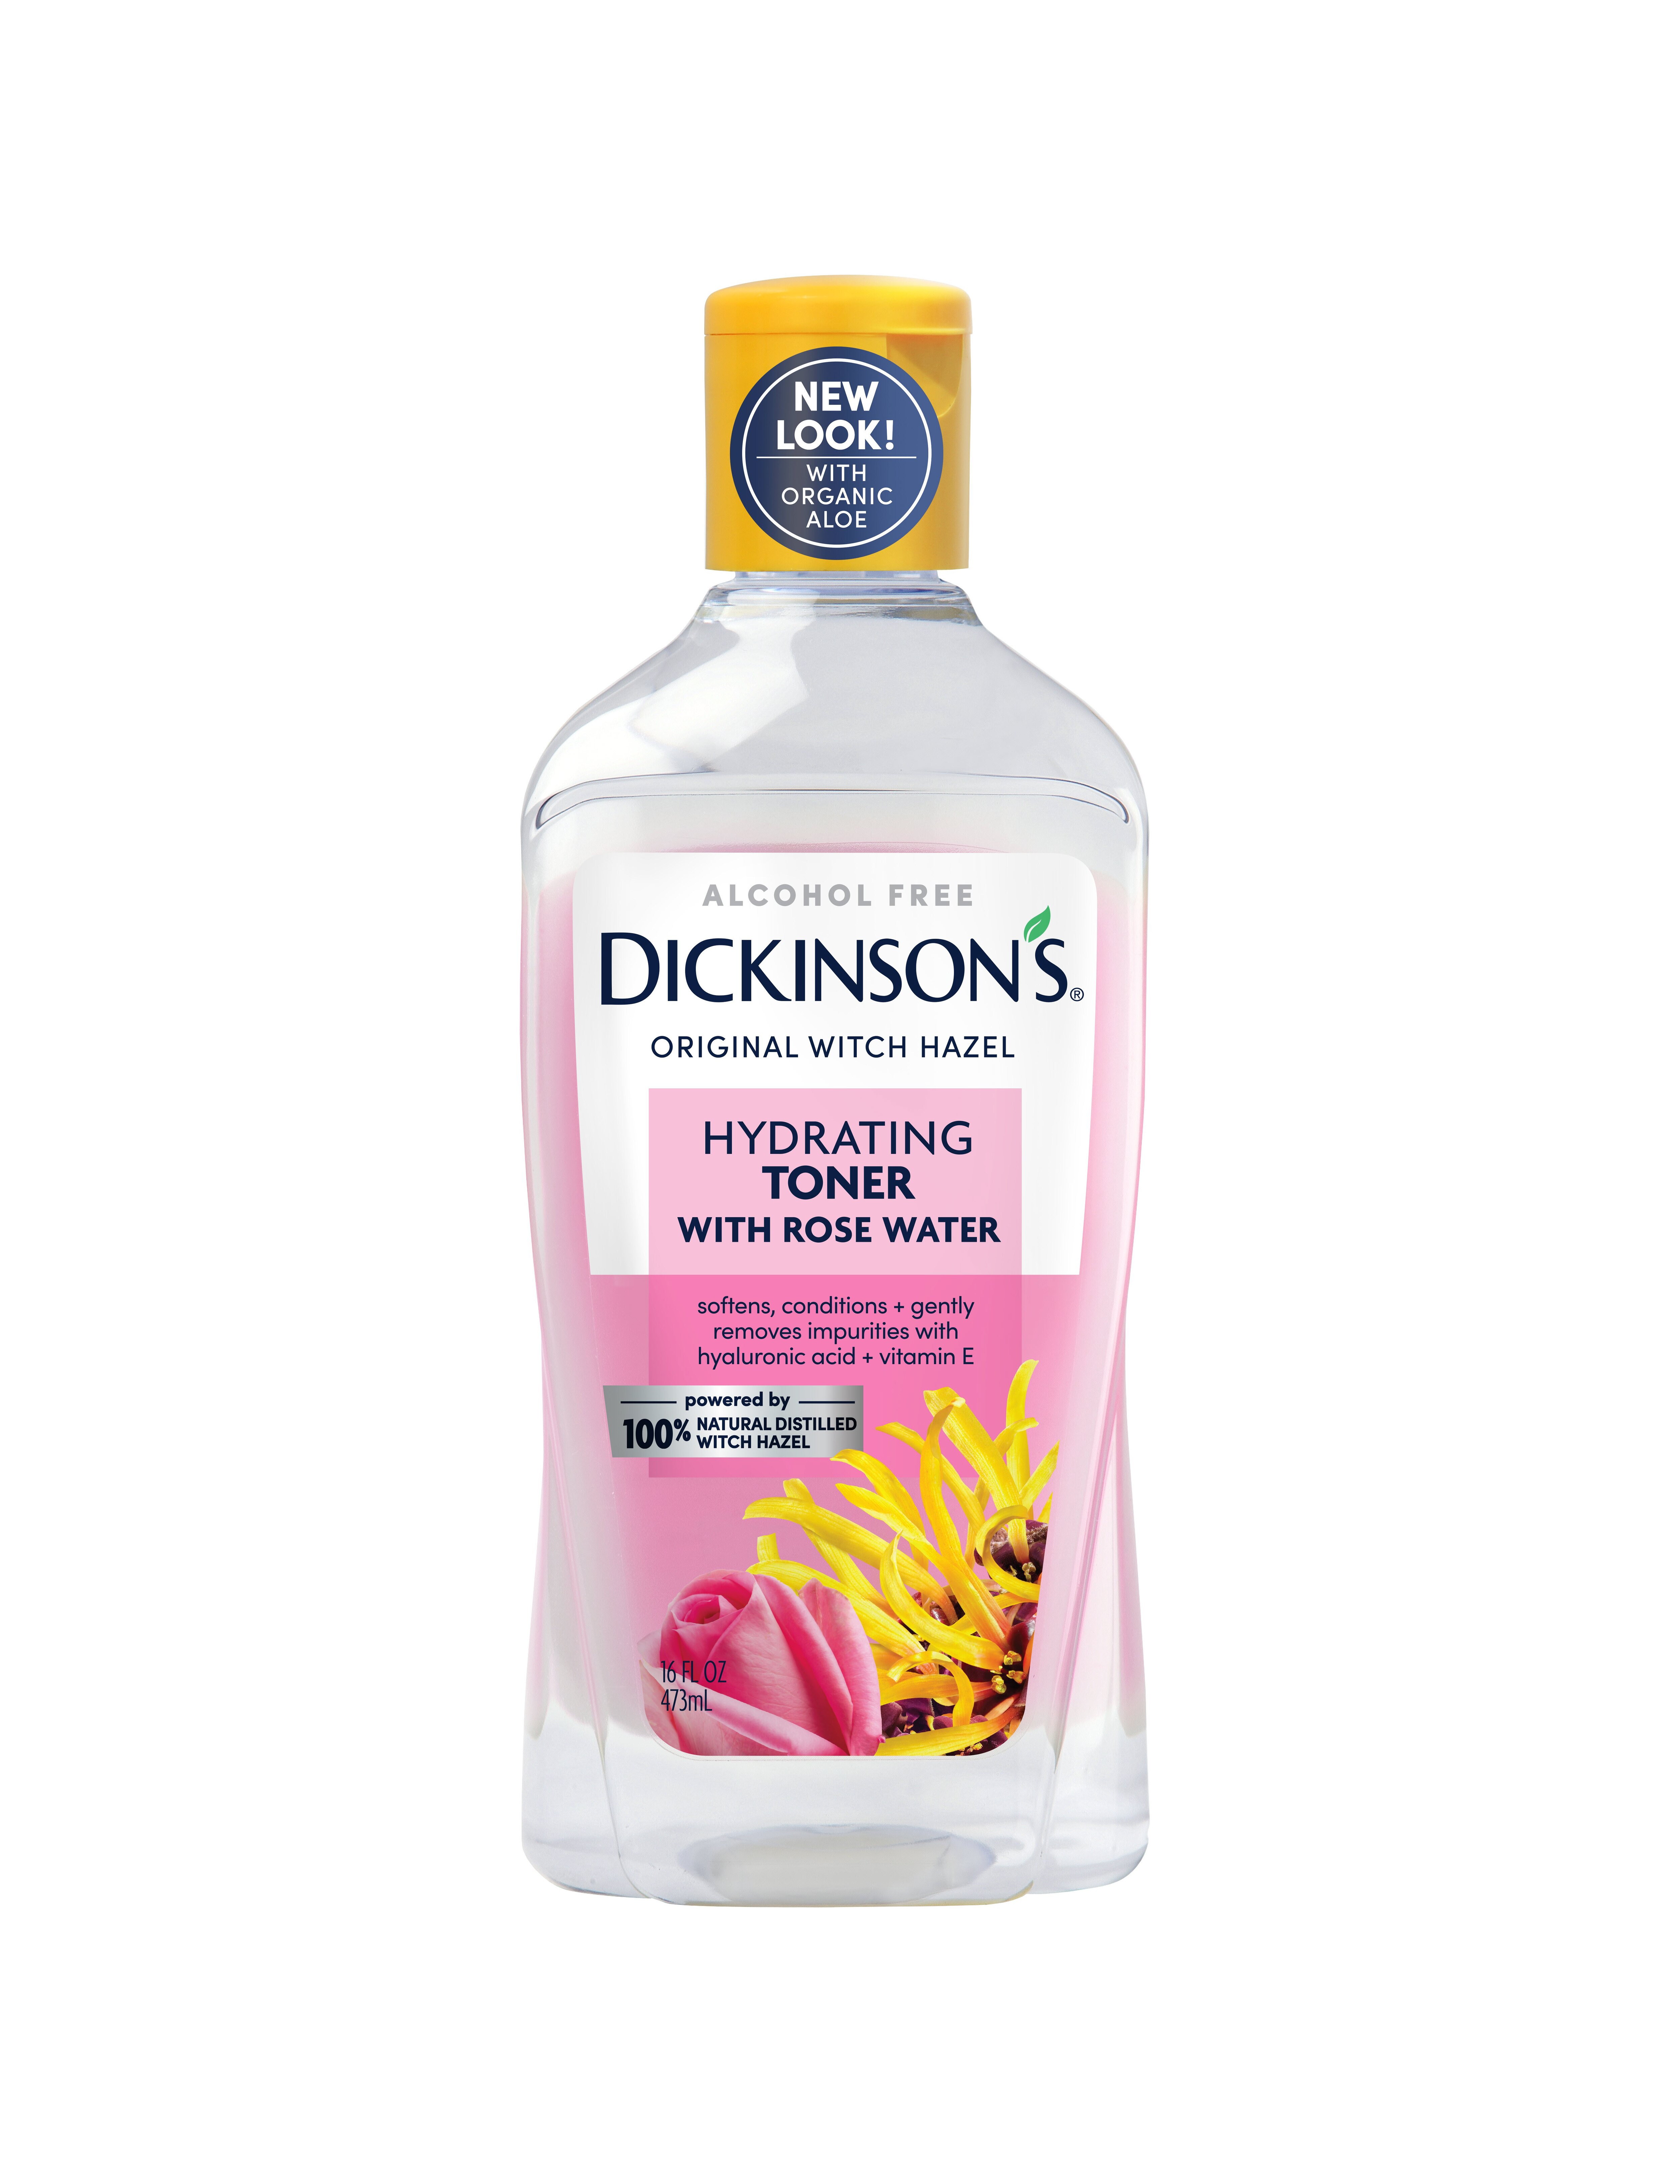 Dickinson's Enhanced Witch Hazel Hydrating Toner with Rosewater, Alcohol Free, 98% Natural Formula, 16 OZ